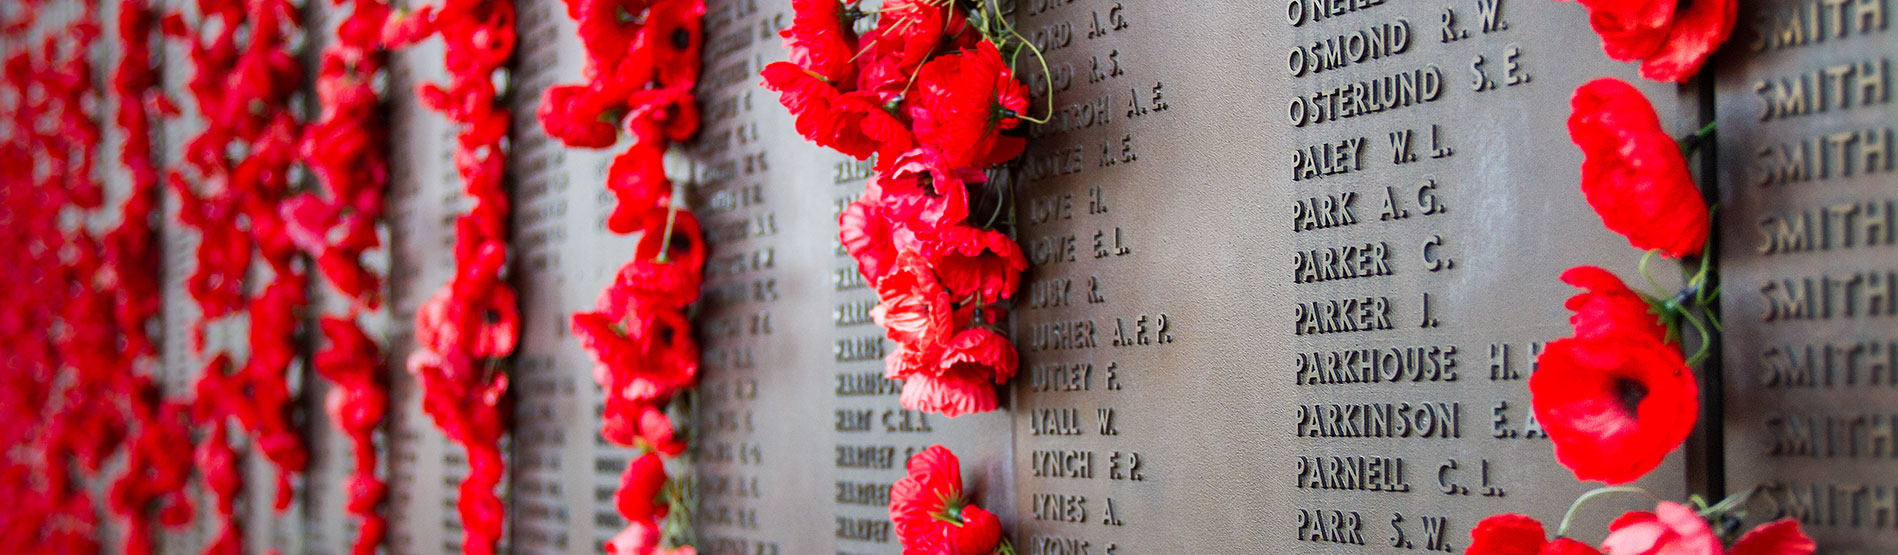 Image of a Wall of Remembrance